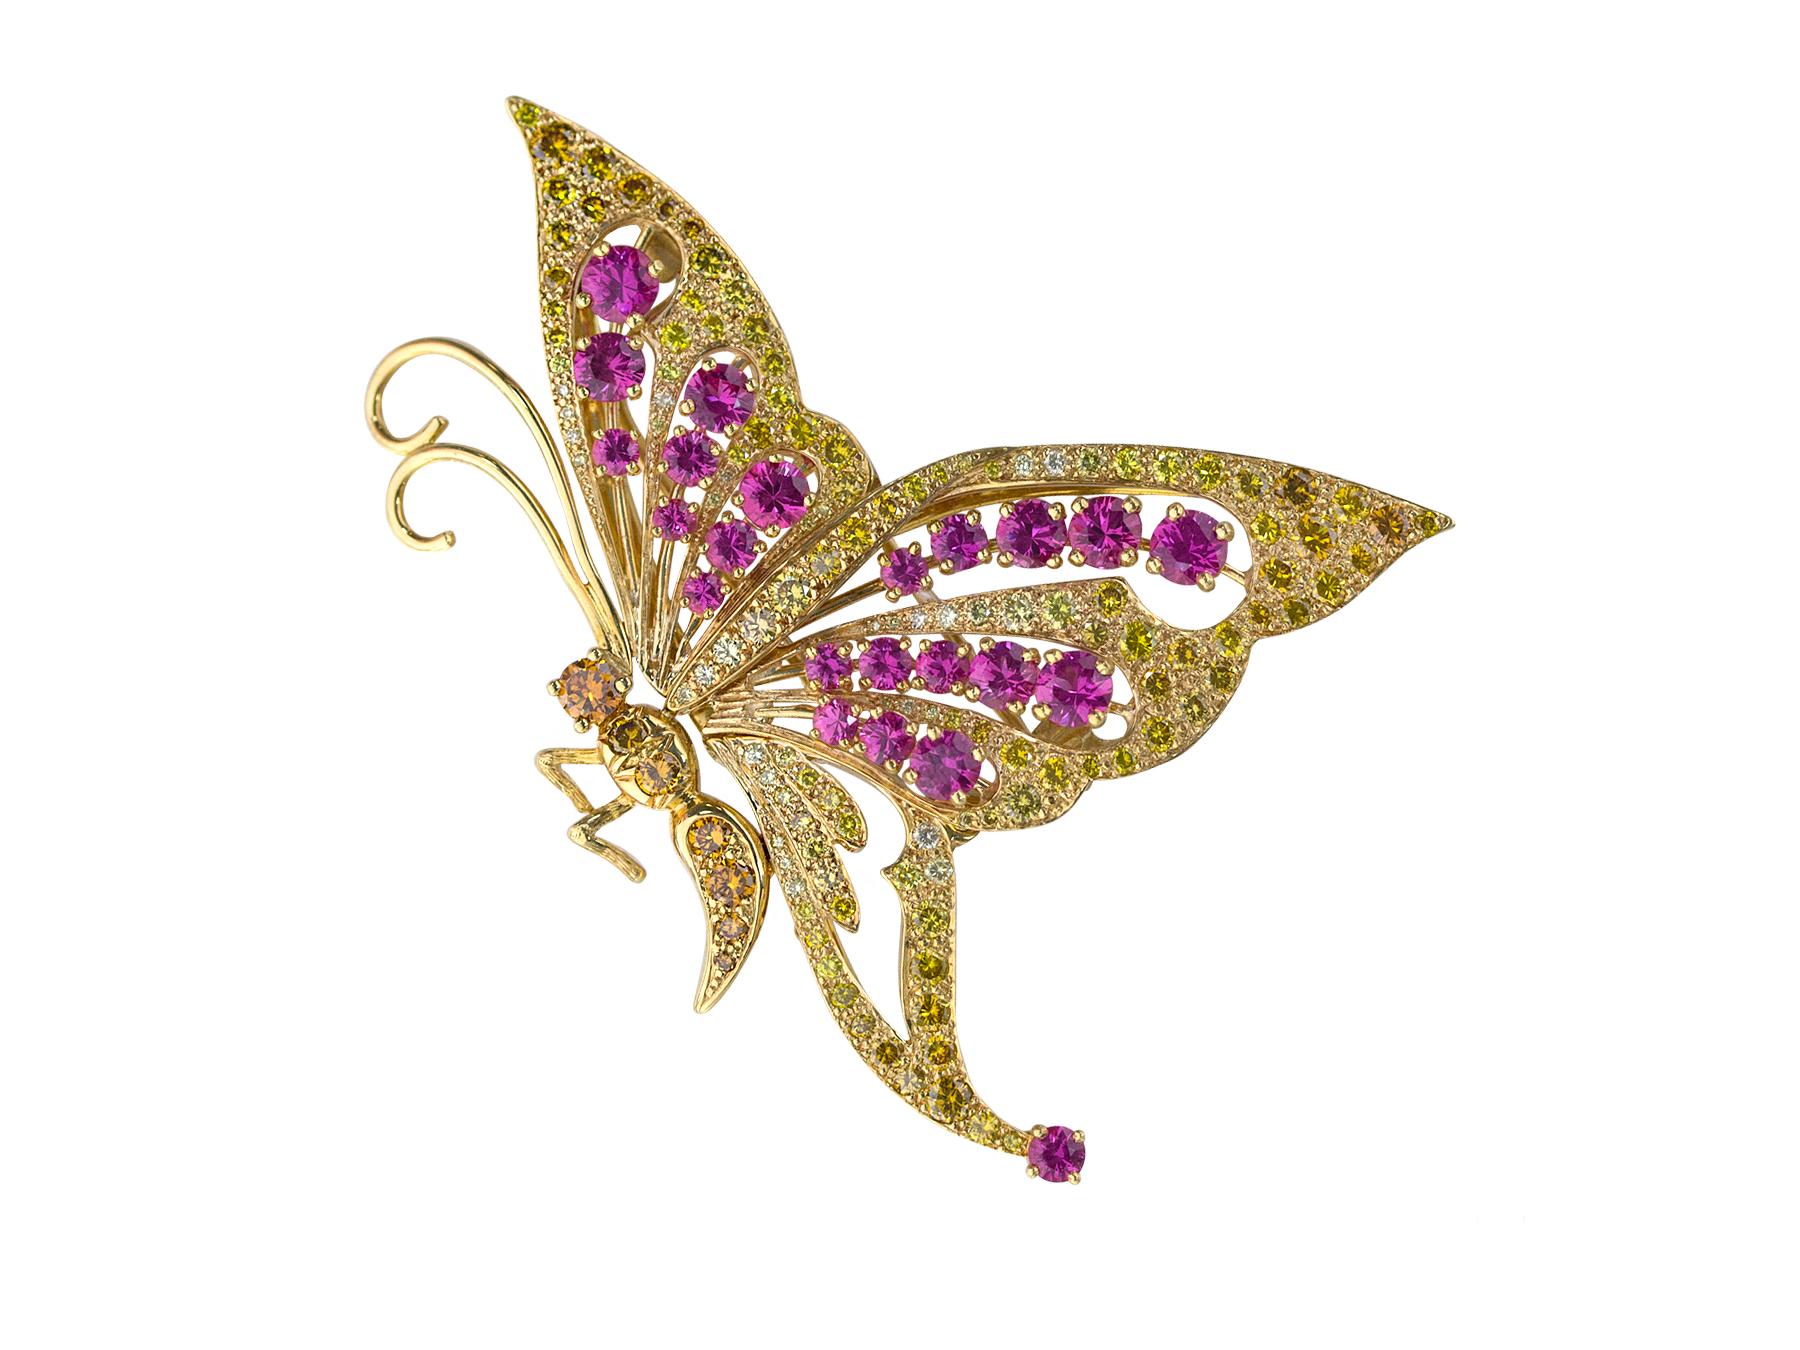 Oscar Heyman 18k yellow gold butterfly brooch contains 23 Round Pink Sapphires (4.29cts) and 132 Fancy Yellow Diamonds (3.01cts). It is stamped with the makers mark, 18K, and serial number 200683. It is an ideal for a brooch lover looking for an